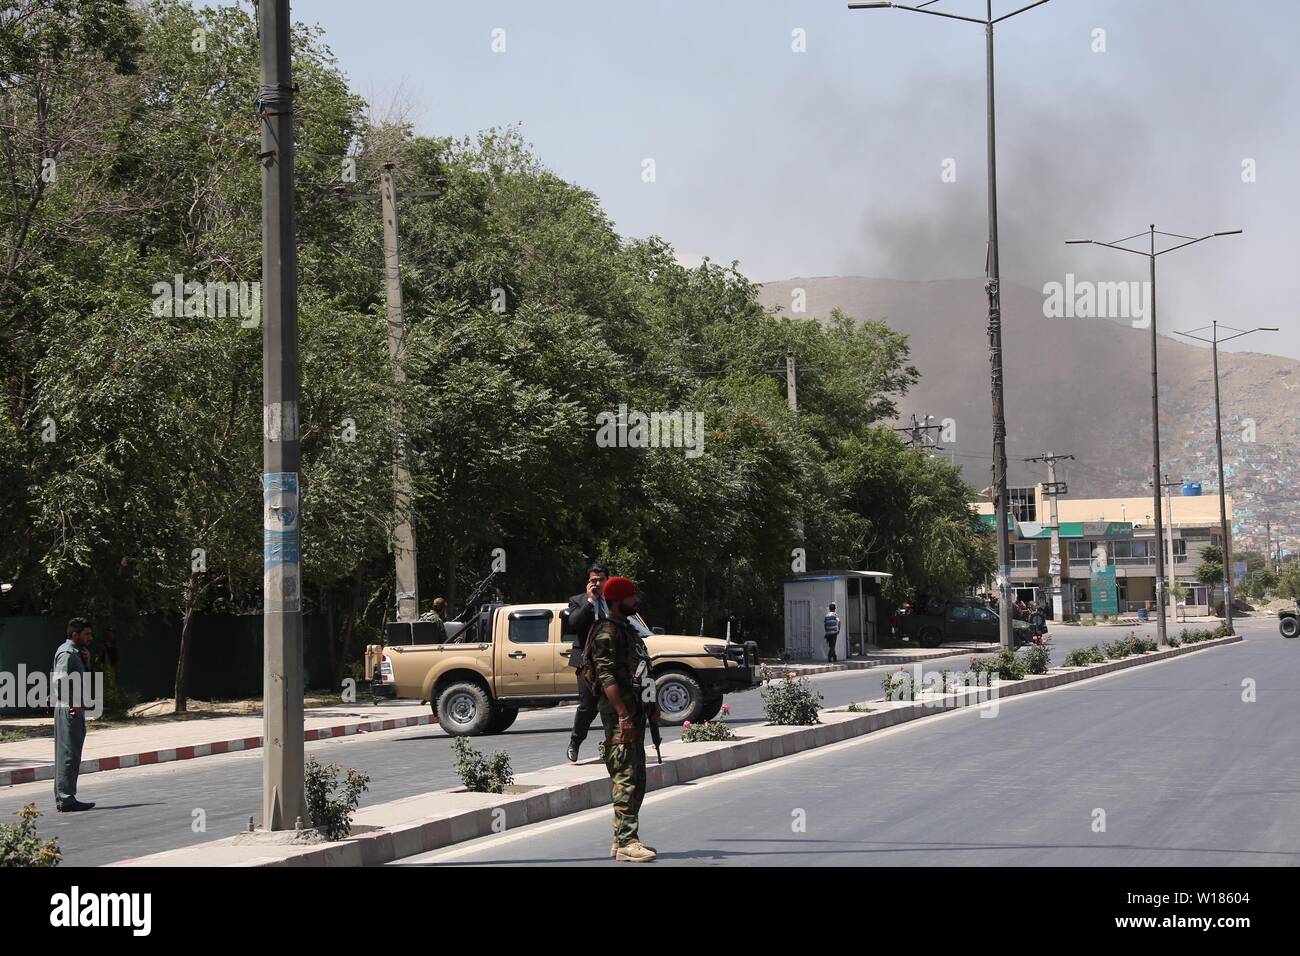 Kabul Afghanistan 1st July 2019 Members Of Afghan Security Forces Stand Guard Near The Blast Site In Kabul Capital Of Afghanistan On July 1 2019 Up To 34 People Have Been Confirmed